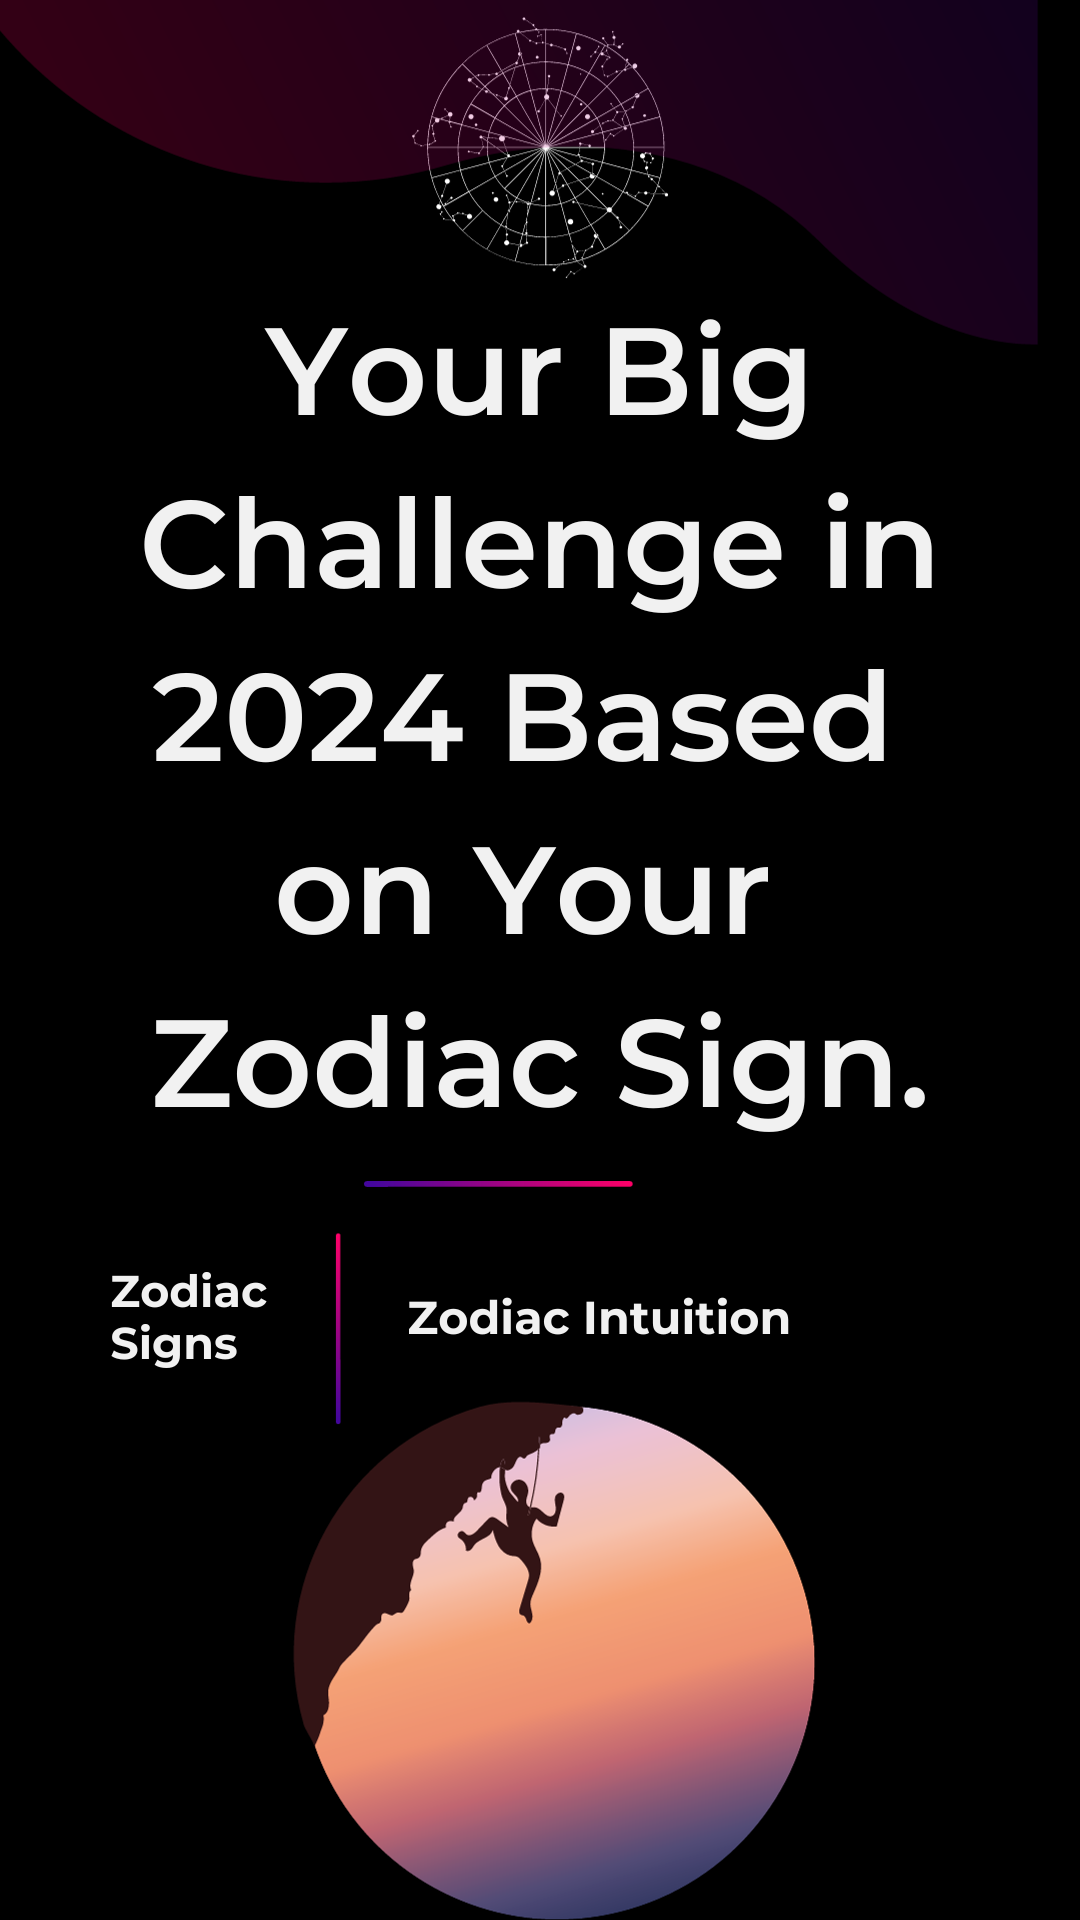 Your Big Challenge in 2024 Based on Your Zodiac Sign.